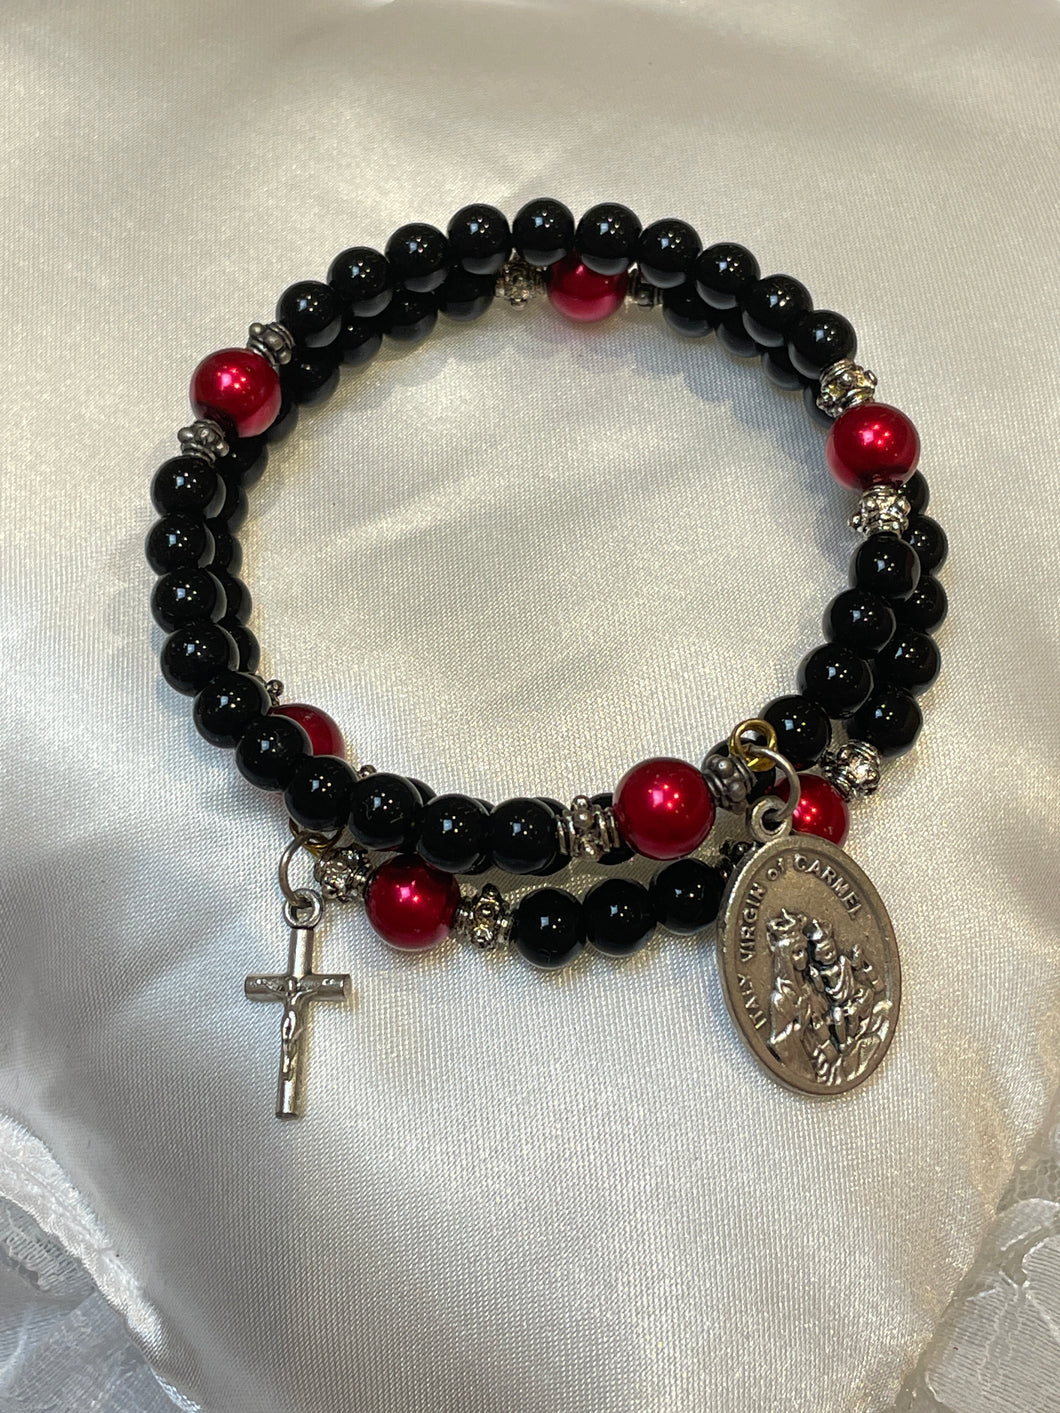 Black and Red Gemstone Rosary Bracelets with Our Lady of Mount Carmel and Sacred Heart of Jesus Charms